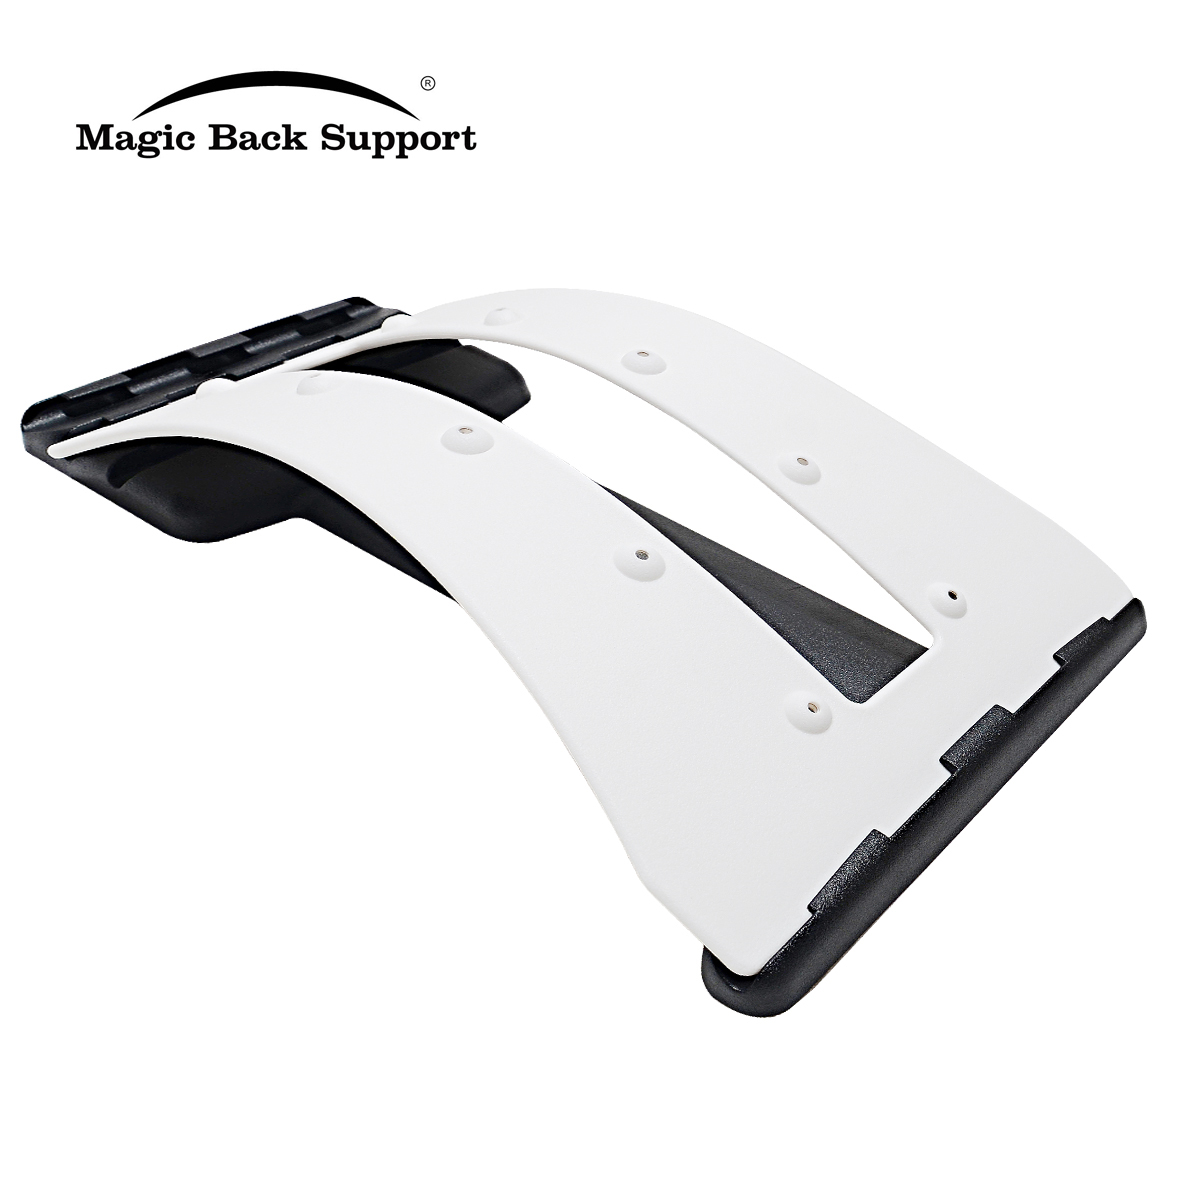 Magic Back Stretcher Lower Lumbar Pain Acupuncture Multi-Level Back  Massager Pain Relief for Herniated Disc Lower and Upper Back Stretcher  Support